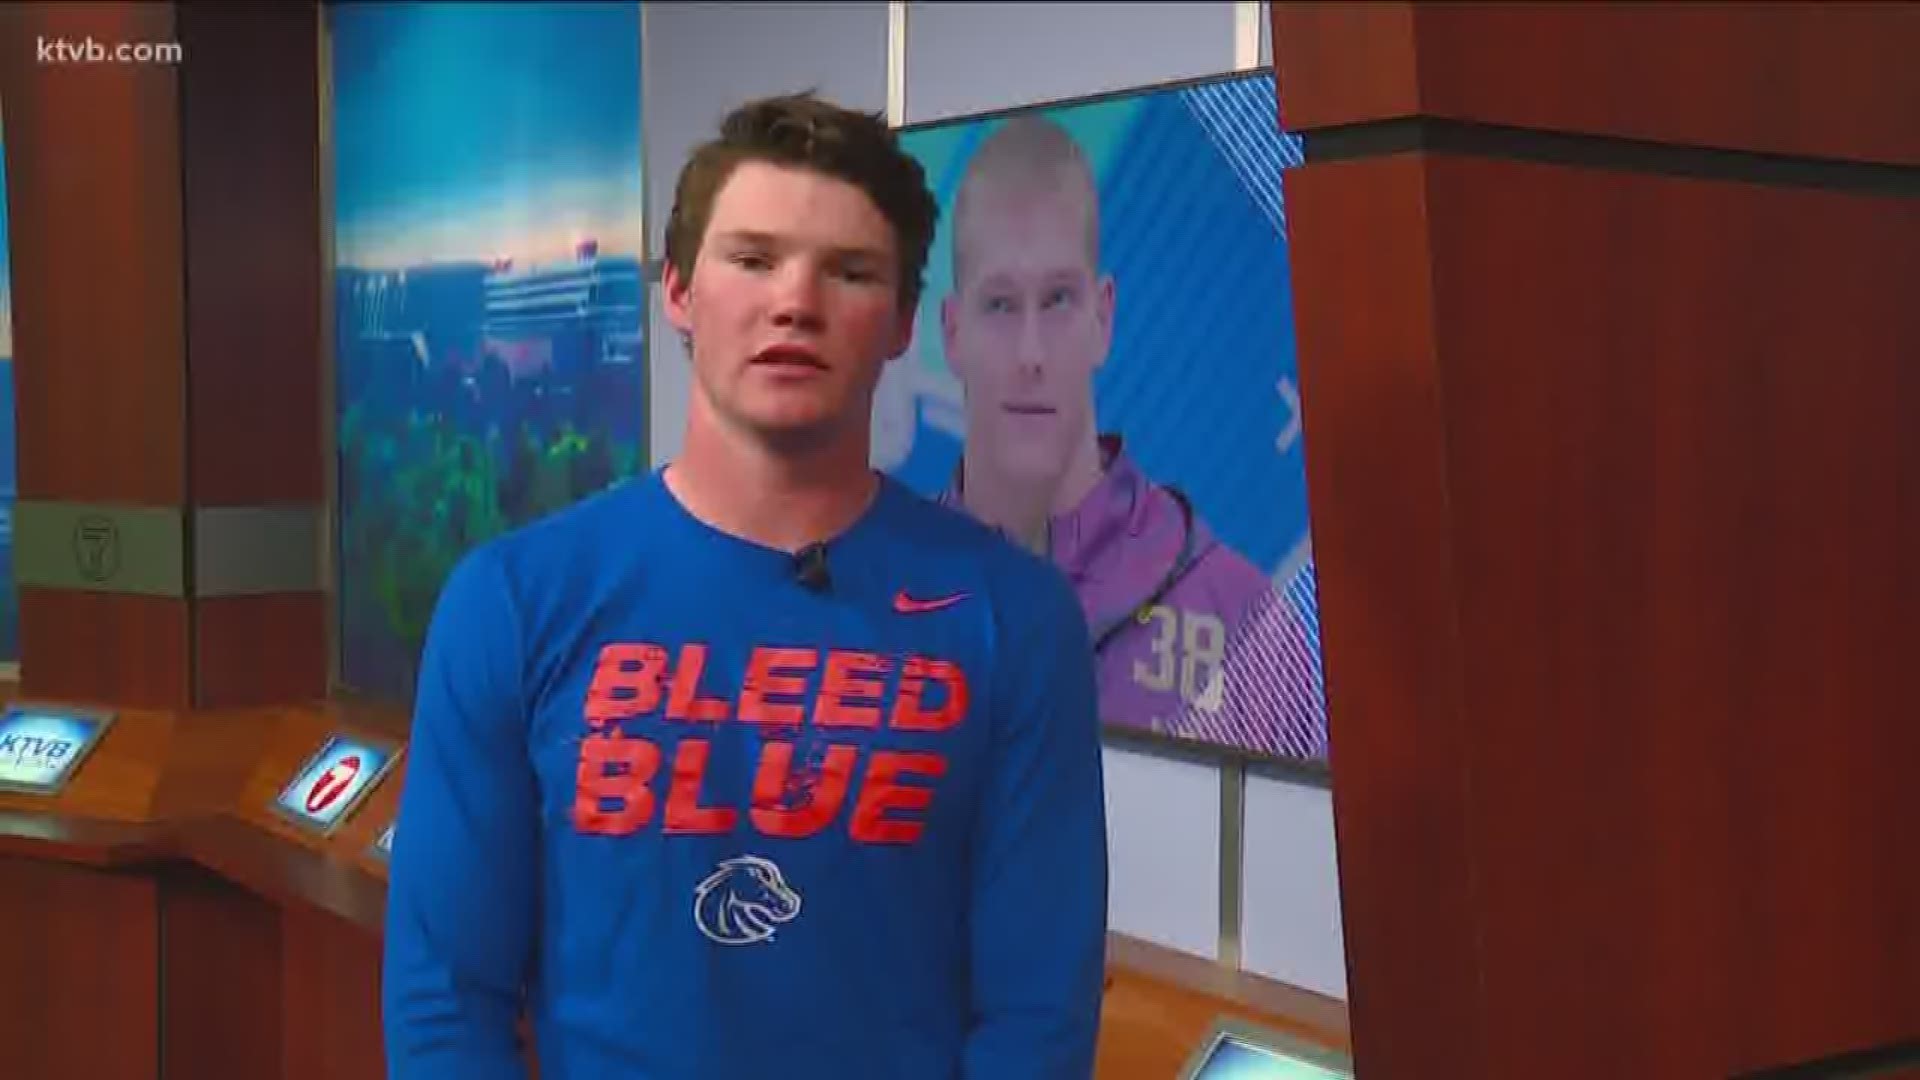 Dylan Herberg accepted a preferred walk-on spot at Boise State University